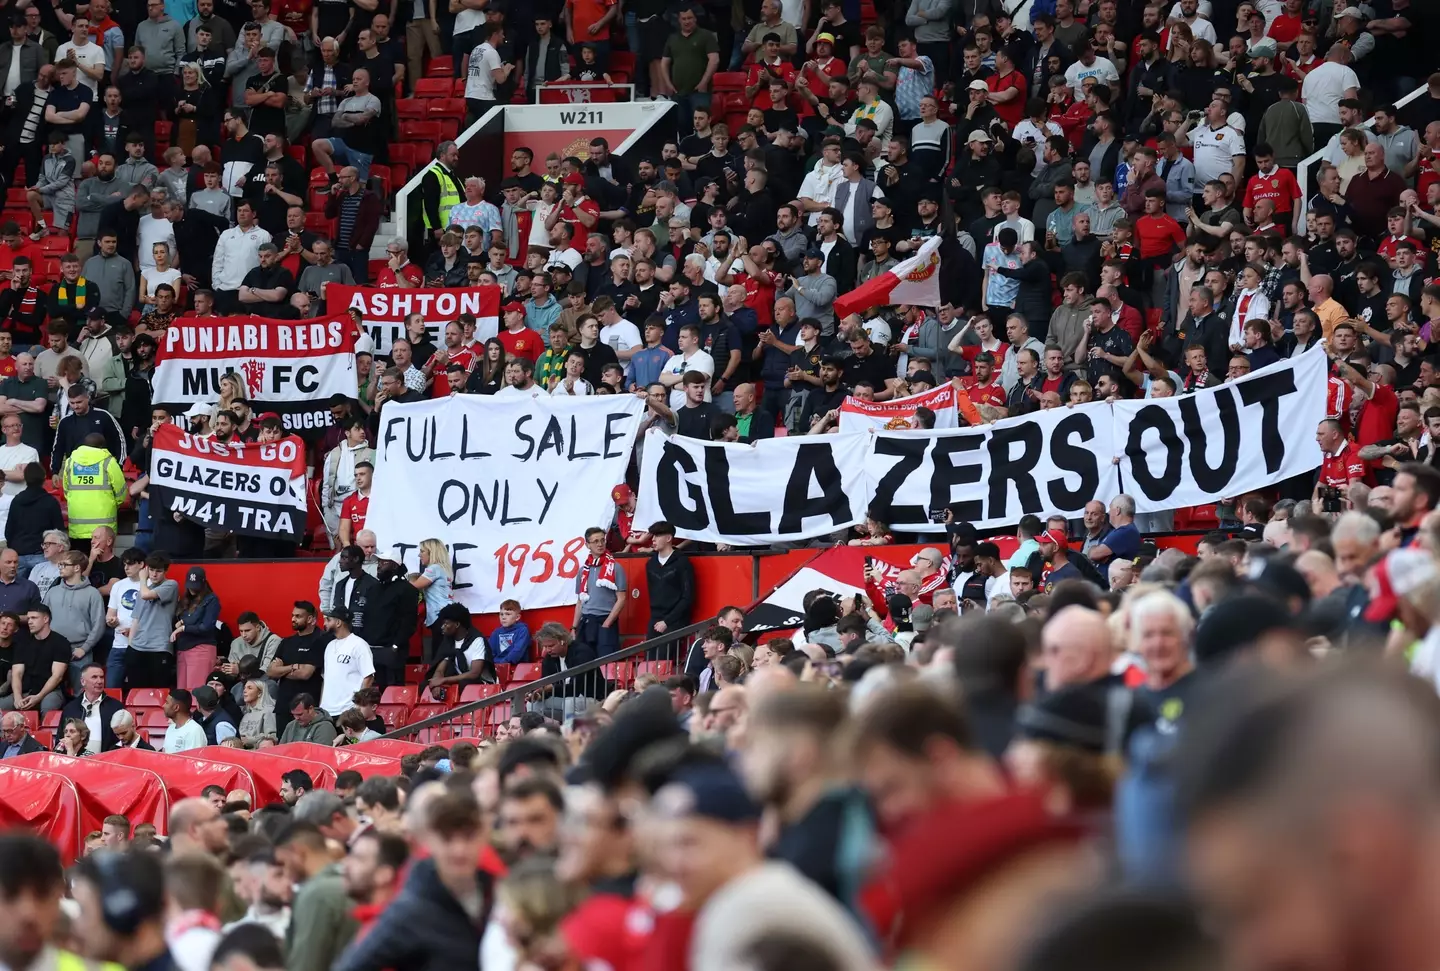 Manchester United fans protest against the Glazers. Image: Getty